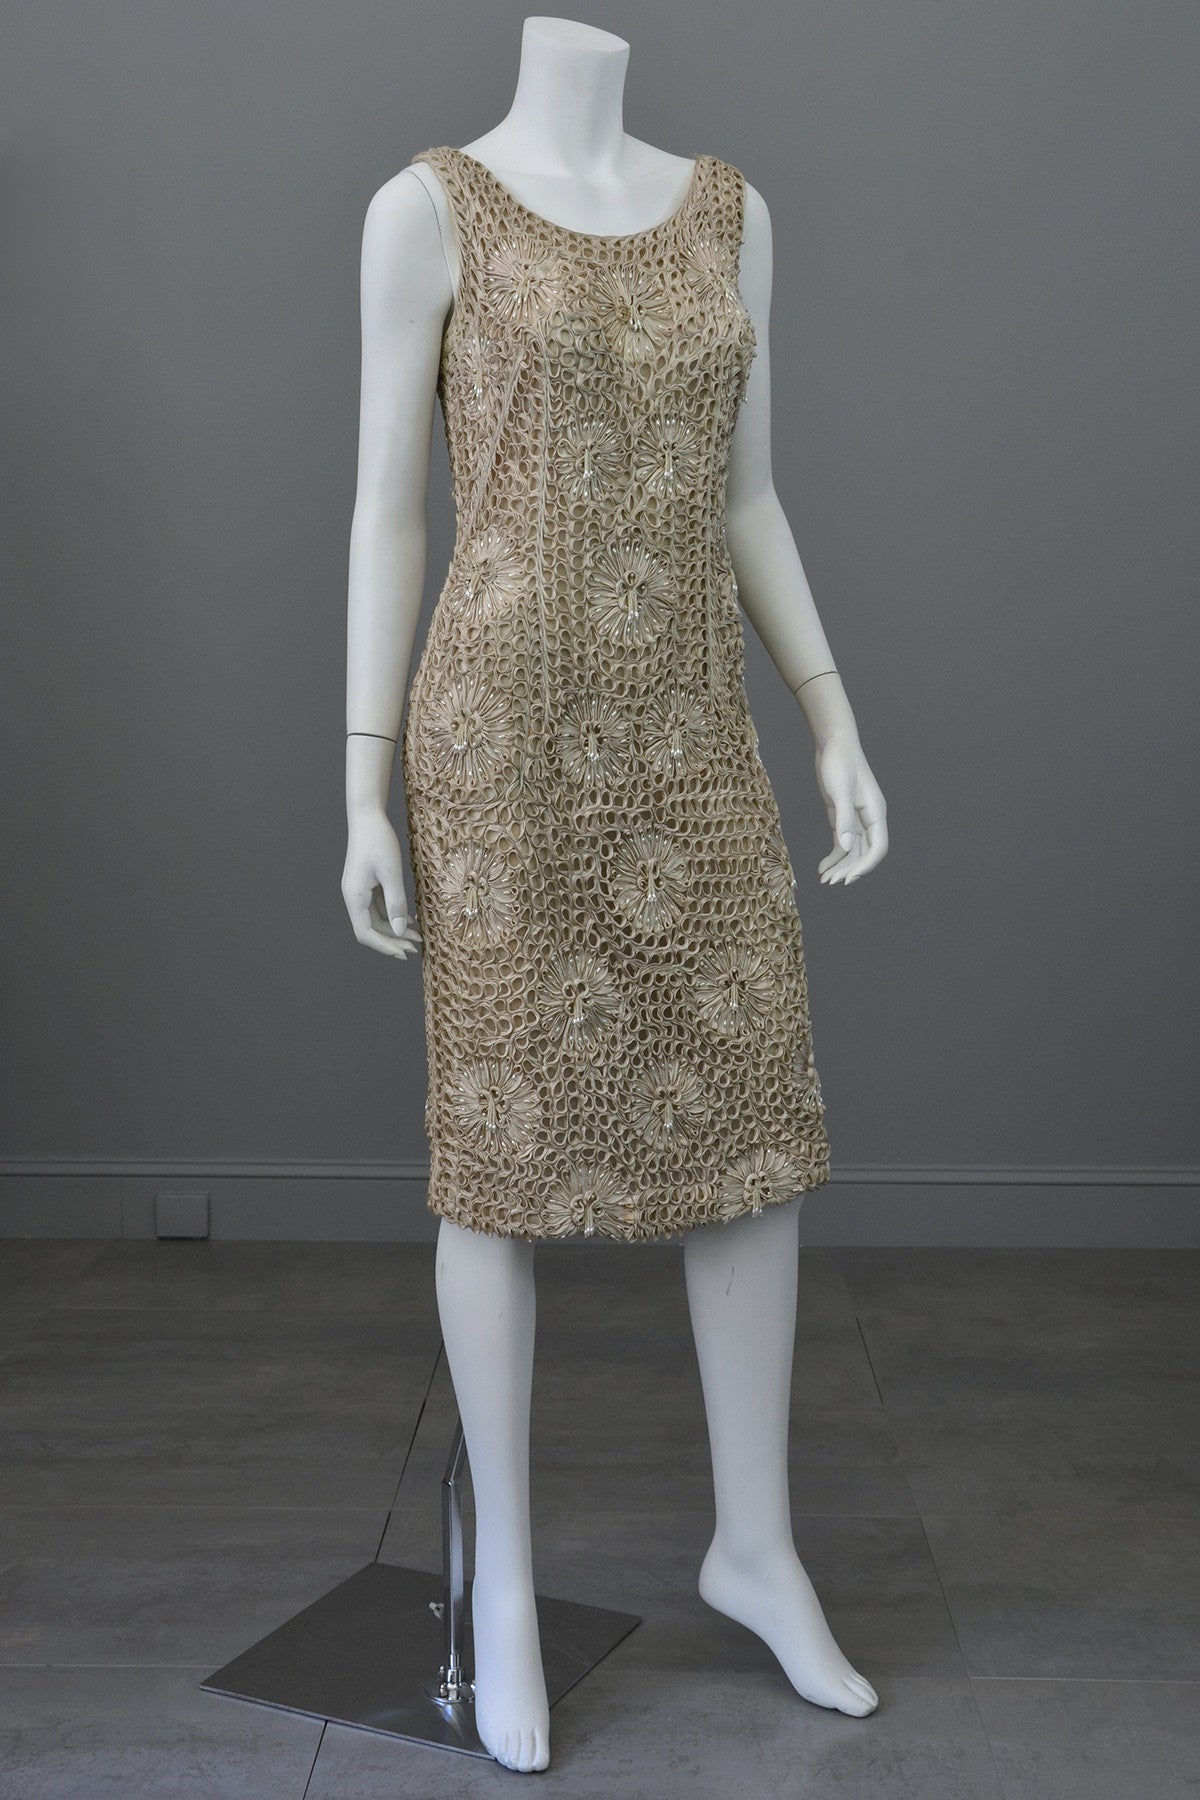 Taupe Ribbon Crochet Dress with Pearl Finge Drops, Vintage Wiggle Cocktail Dress